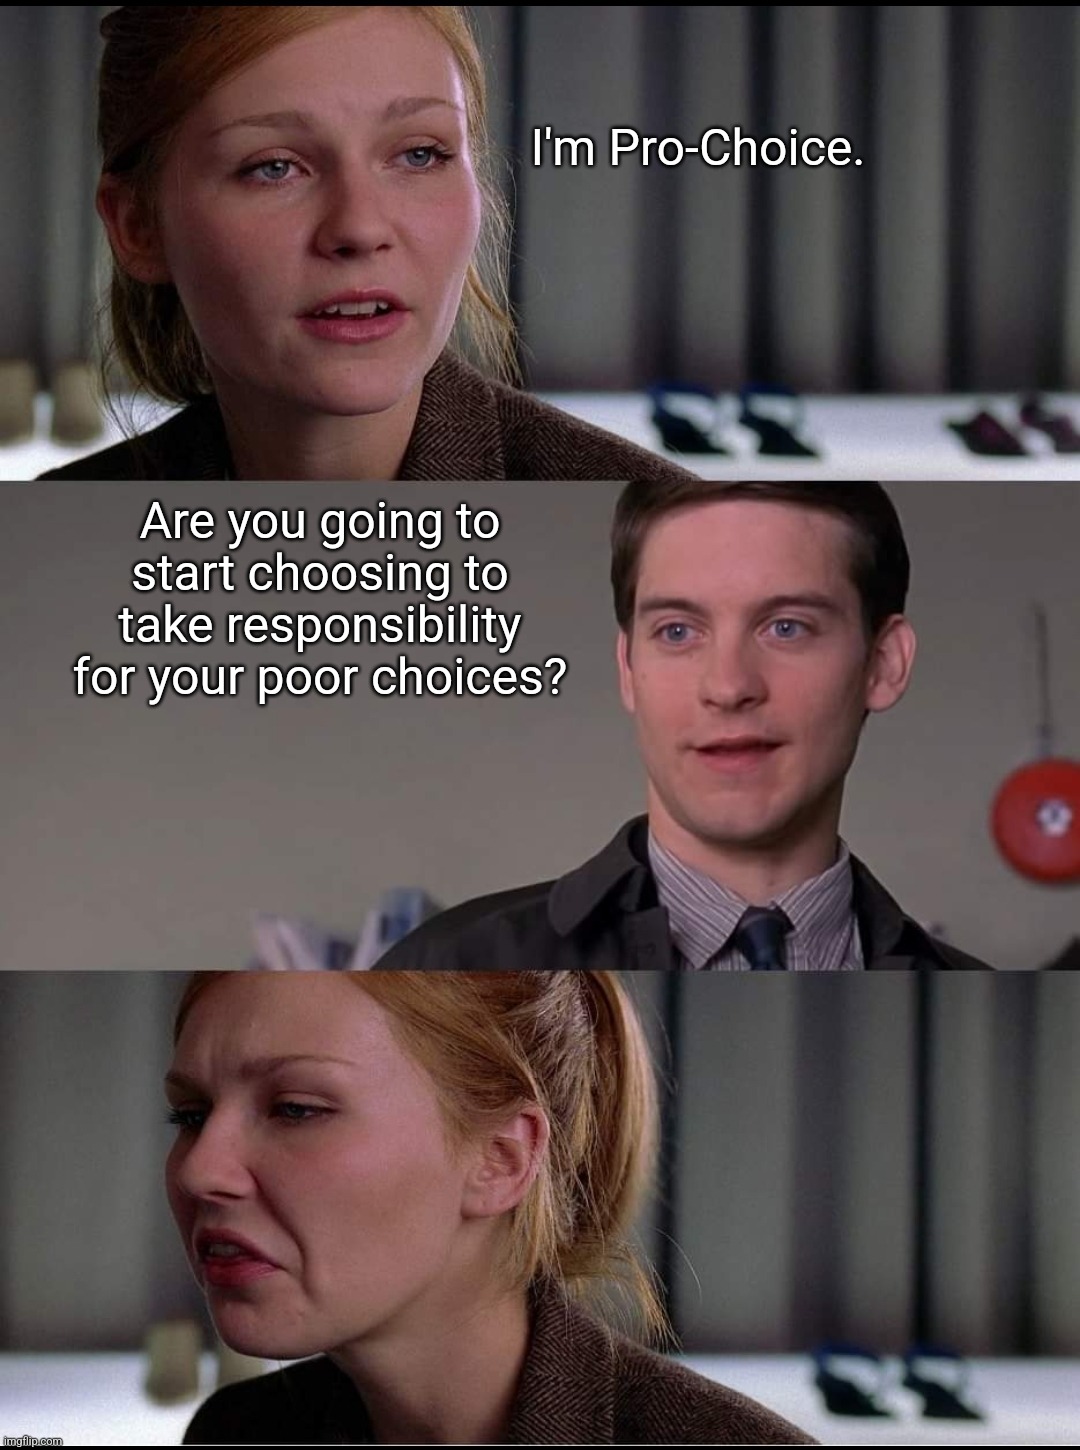 Choices | I'm Pro-Choice. Are you going to start choosing to take responsibility for your poor choices? | image tagged in pro-choice,abortion | made w/ Imgflip meme maker